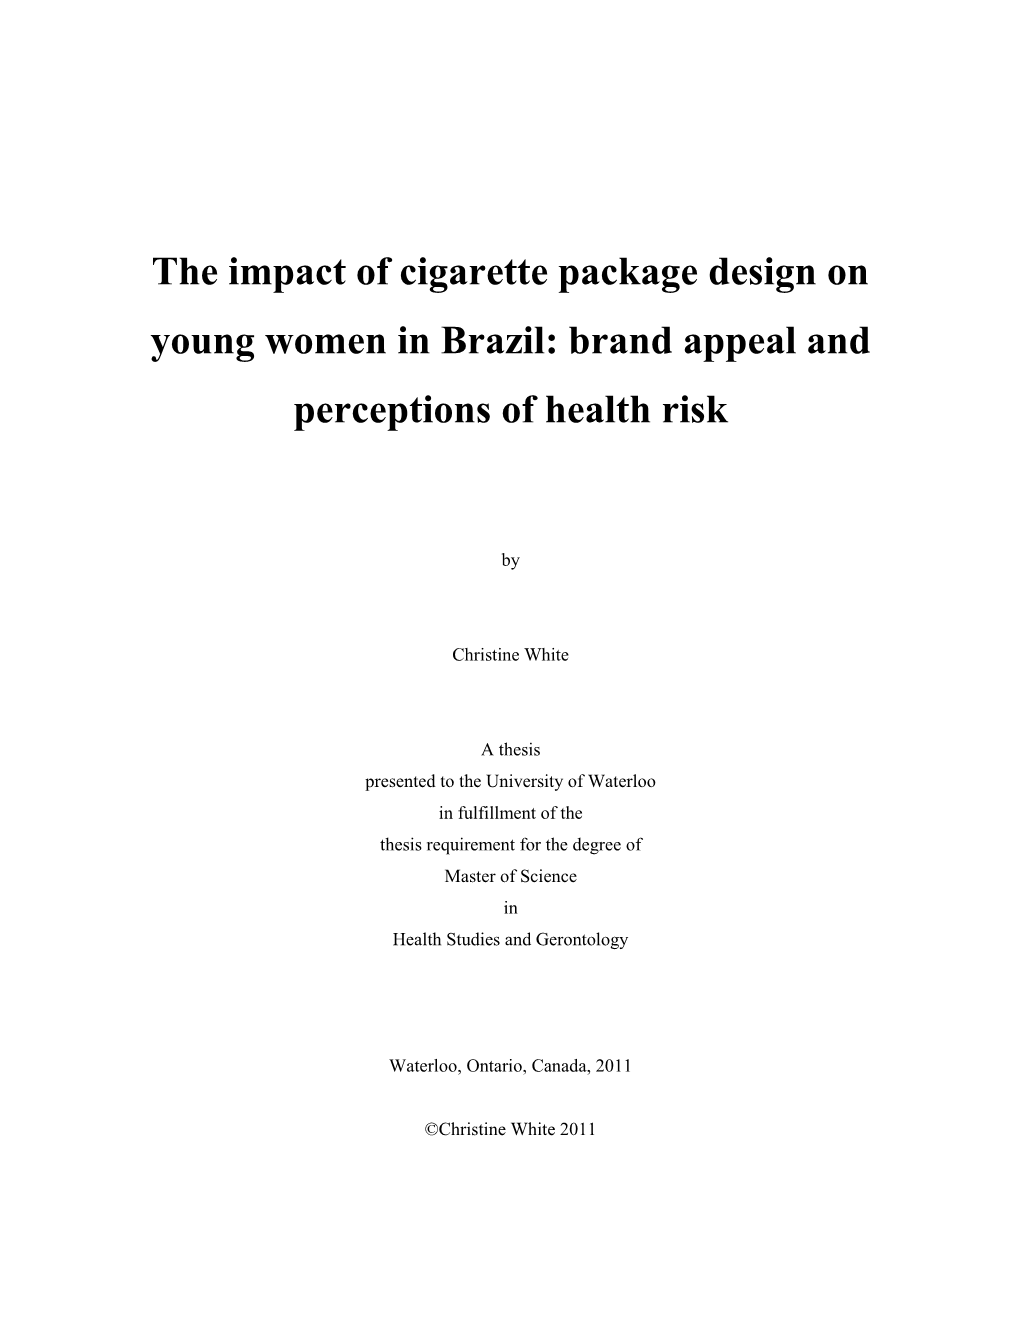 The Impact of Cigarette Package Design on Young Women in Brazil: Brand Appeal and Perceptions of Health Risk